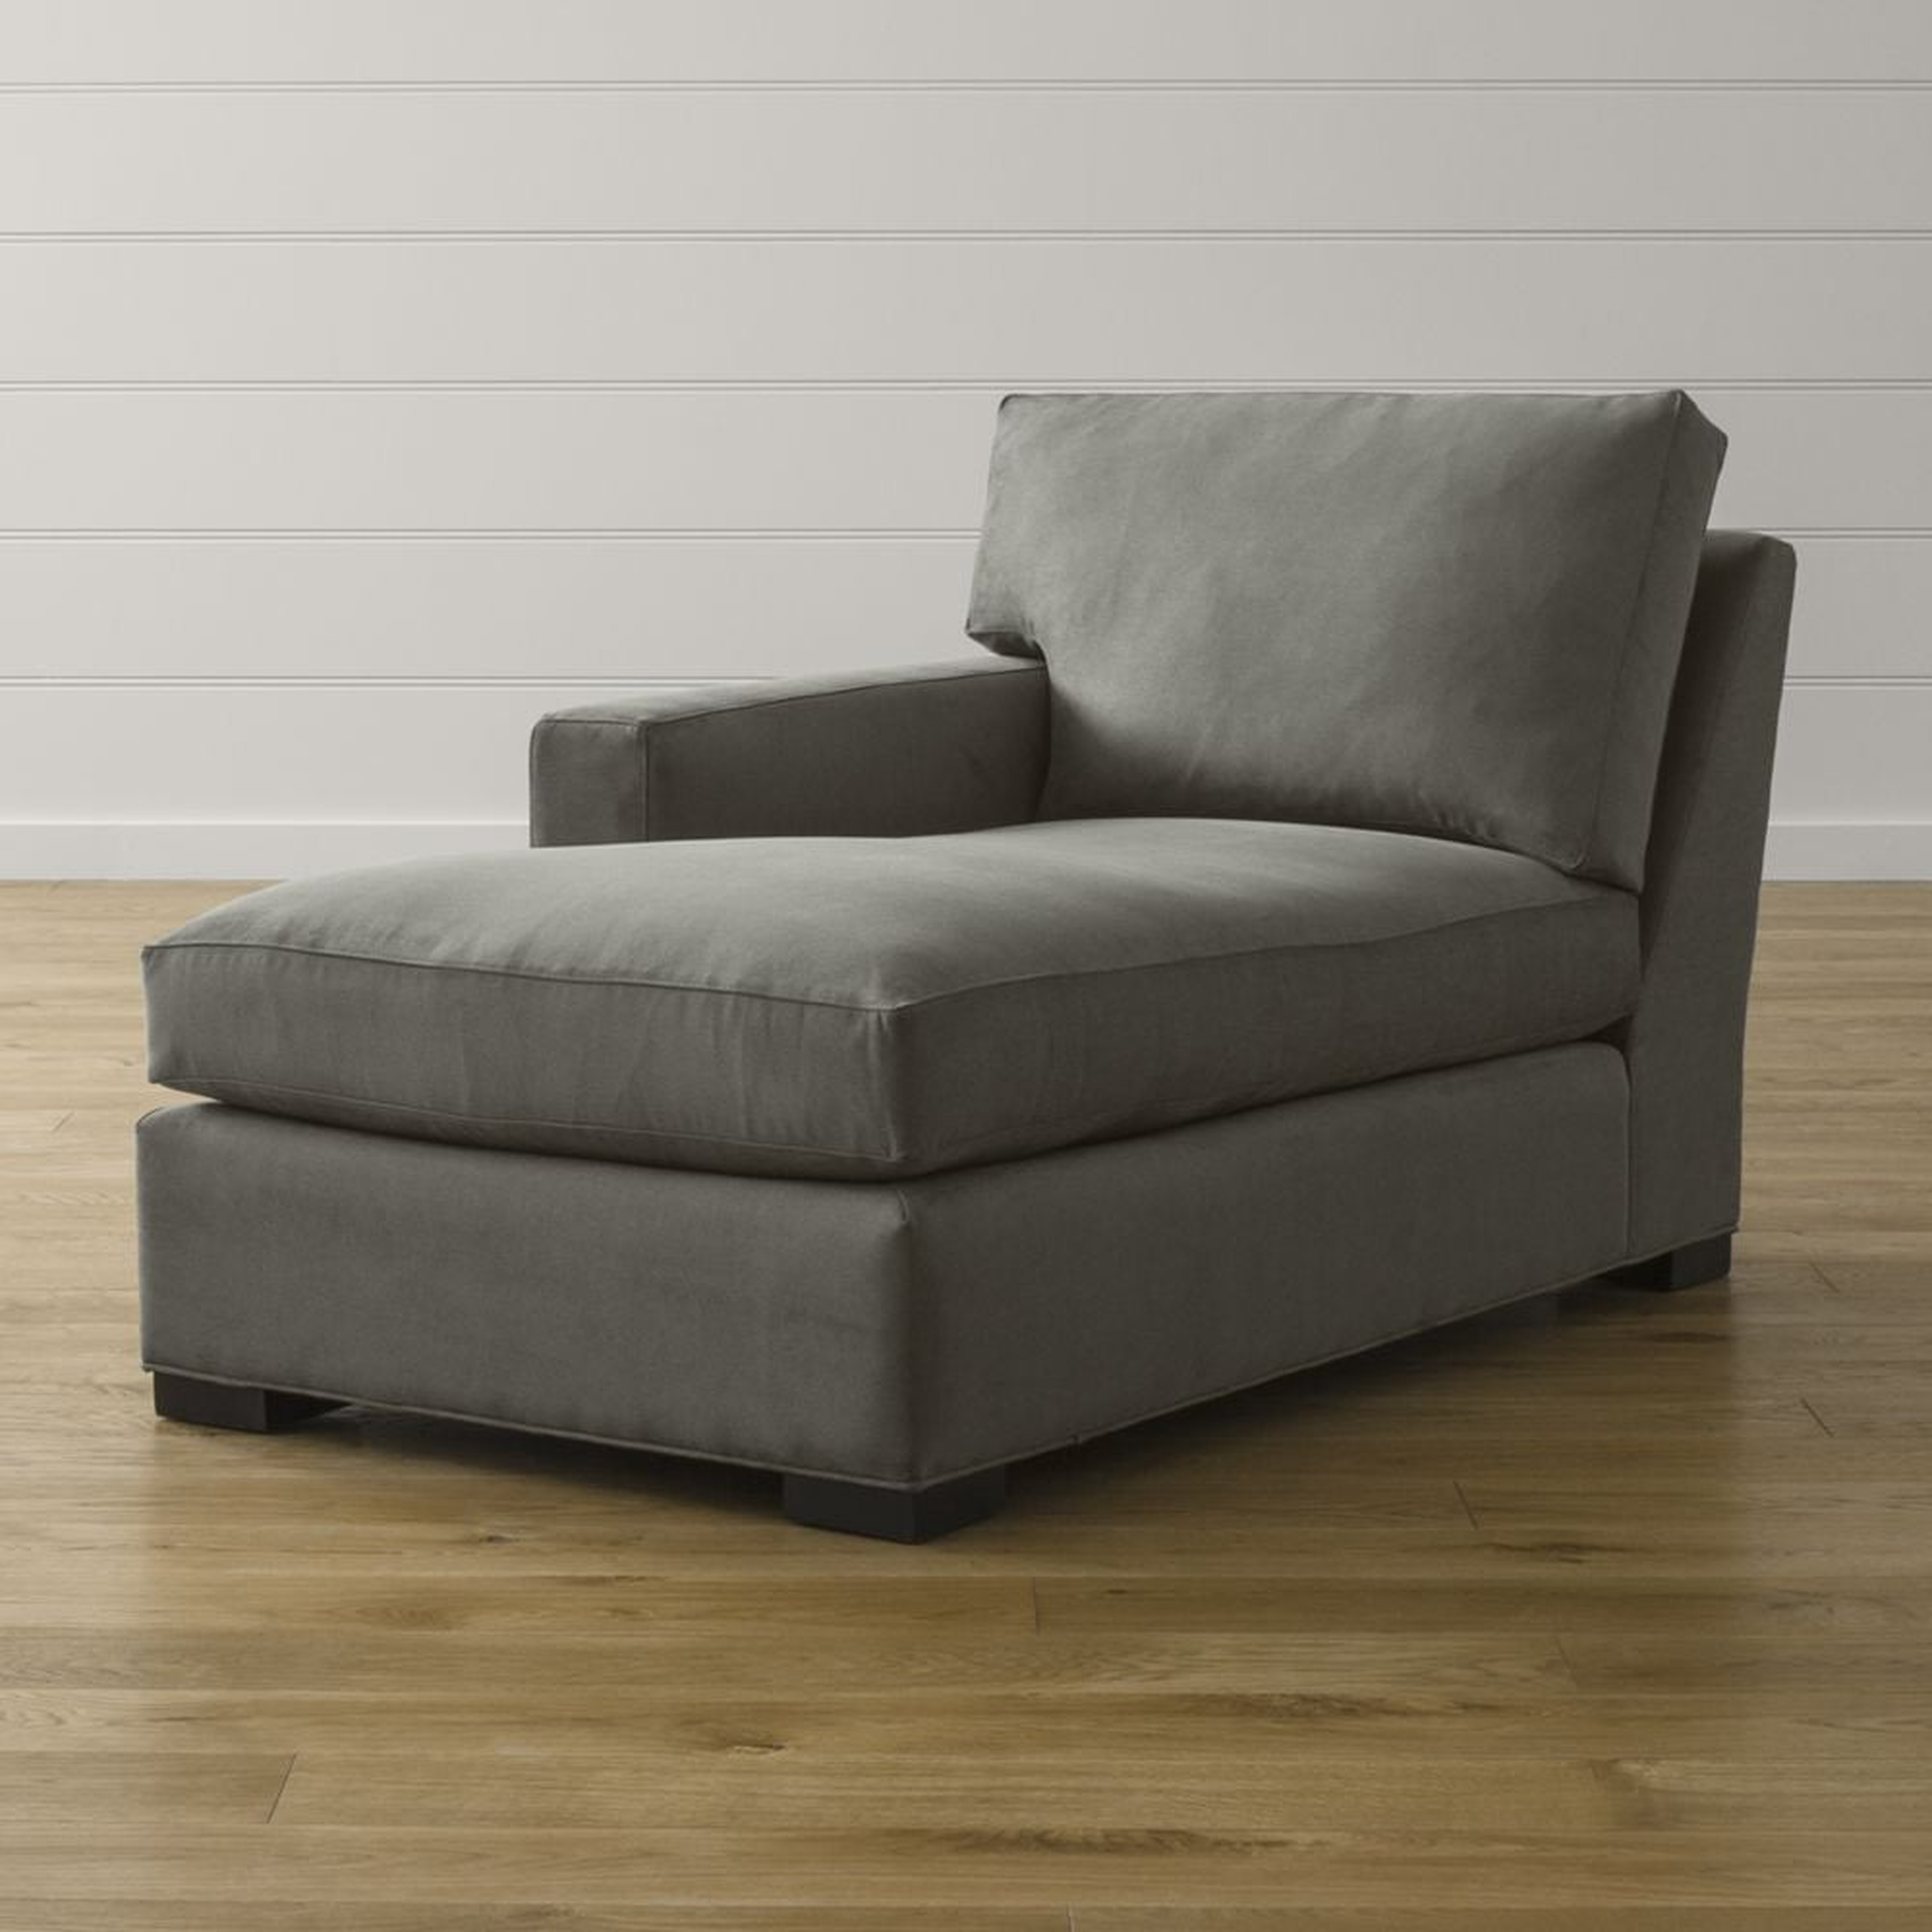 Axis Left Arm Chaise Lounge - Crate and Barrel